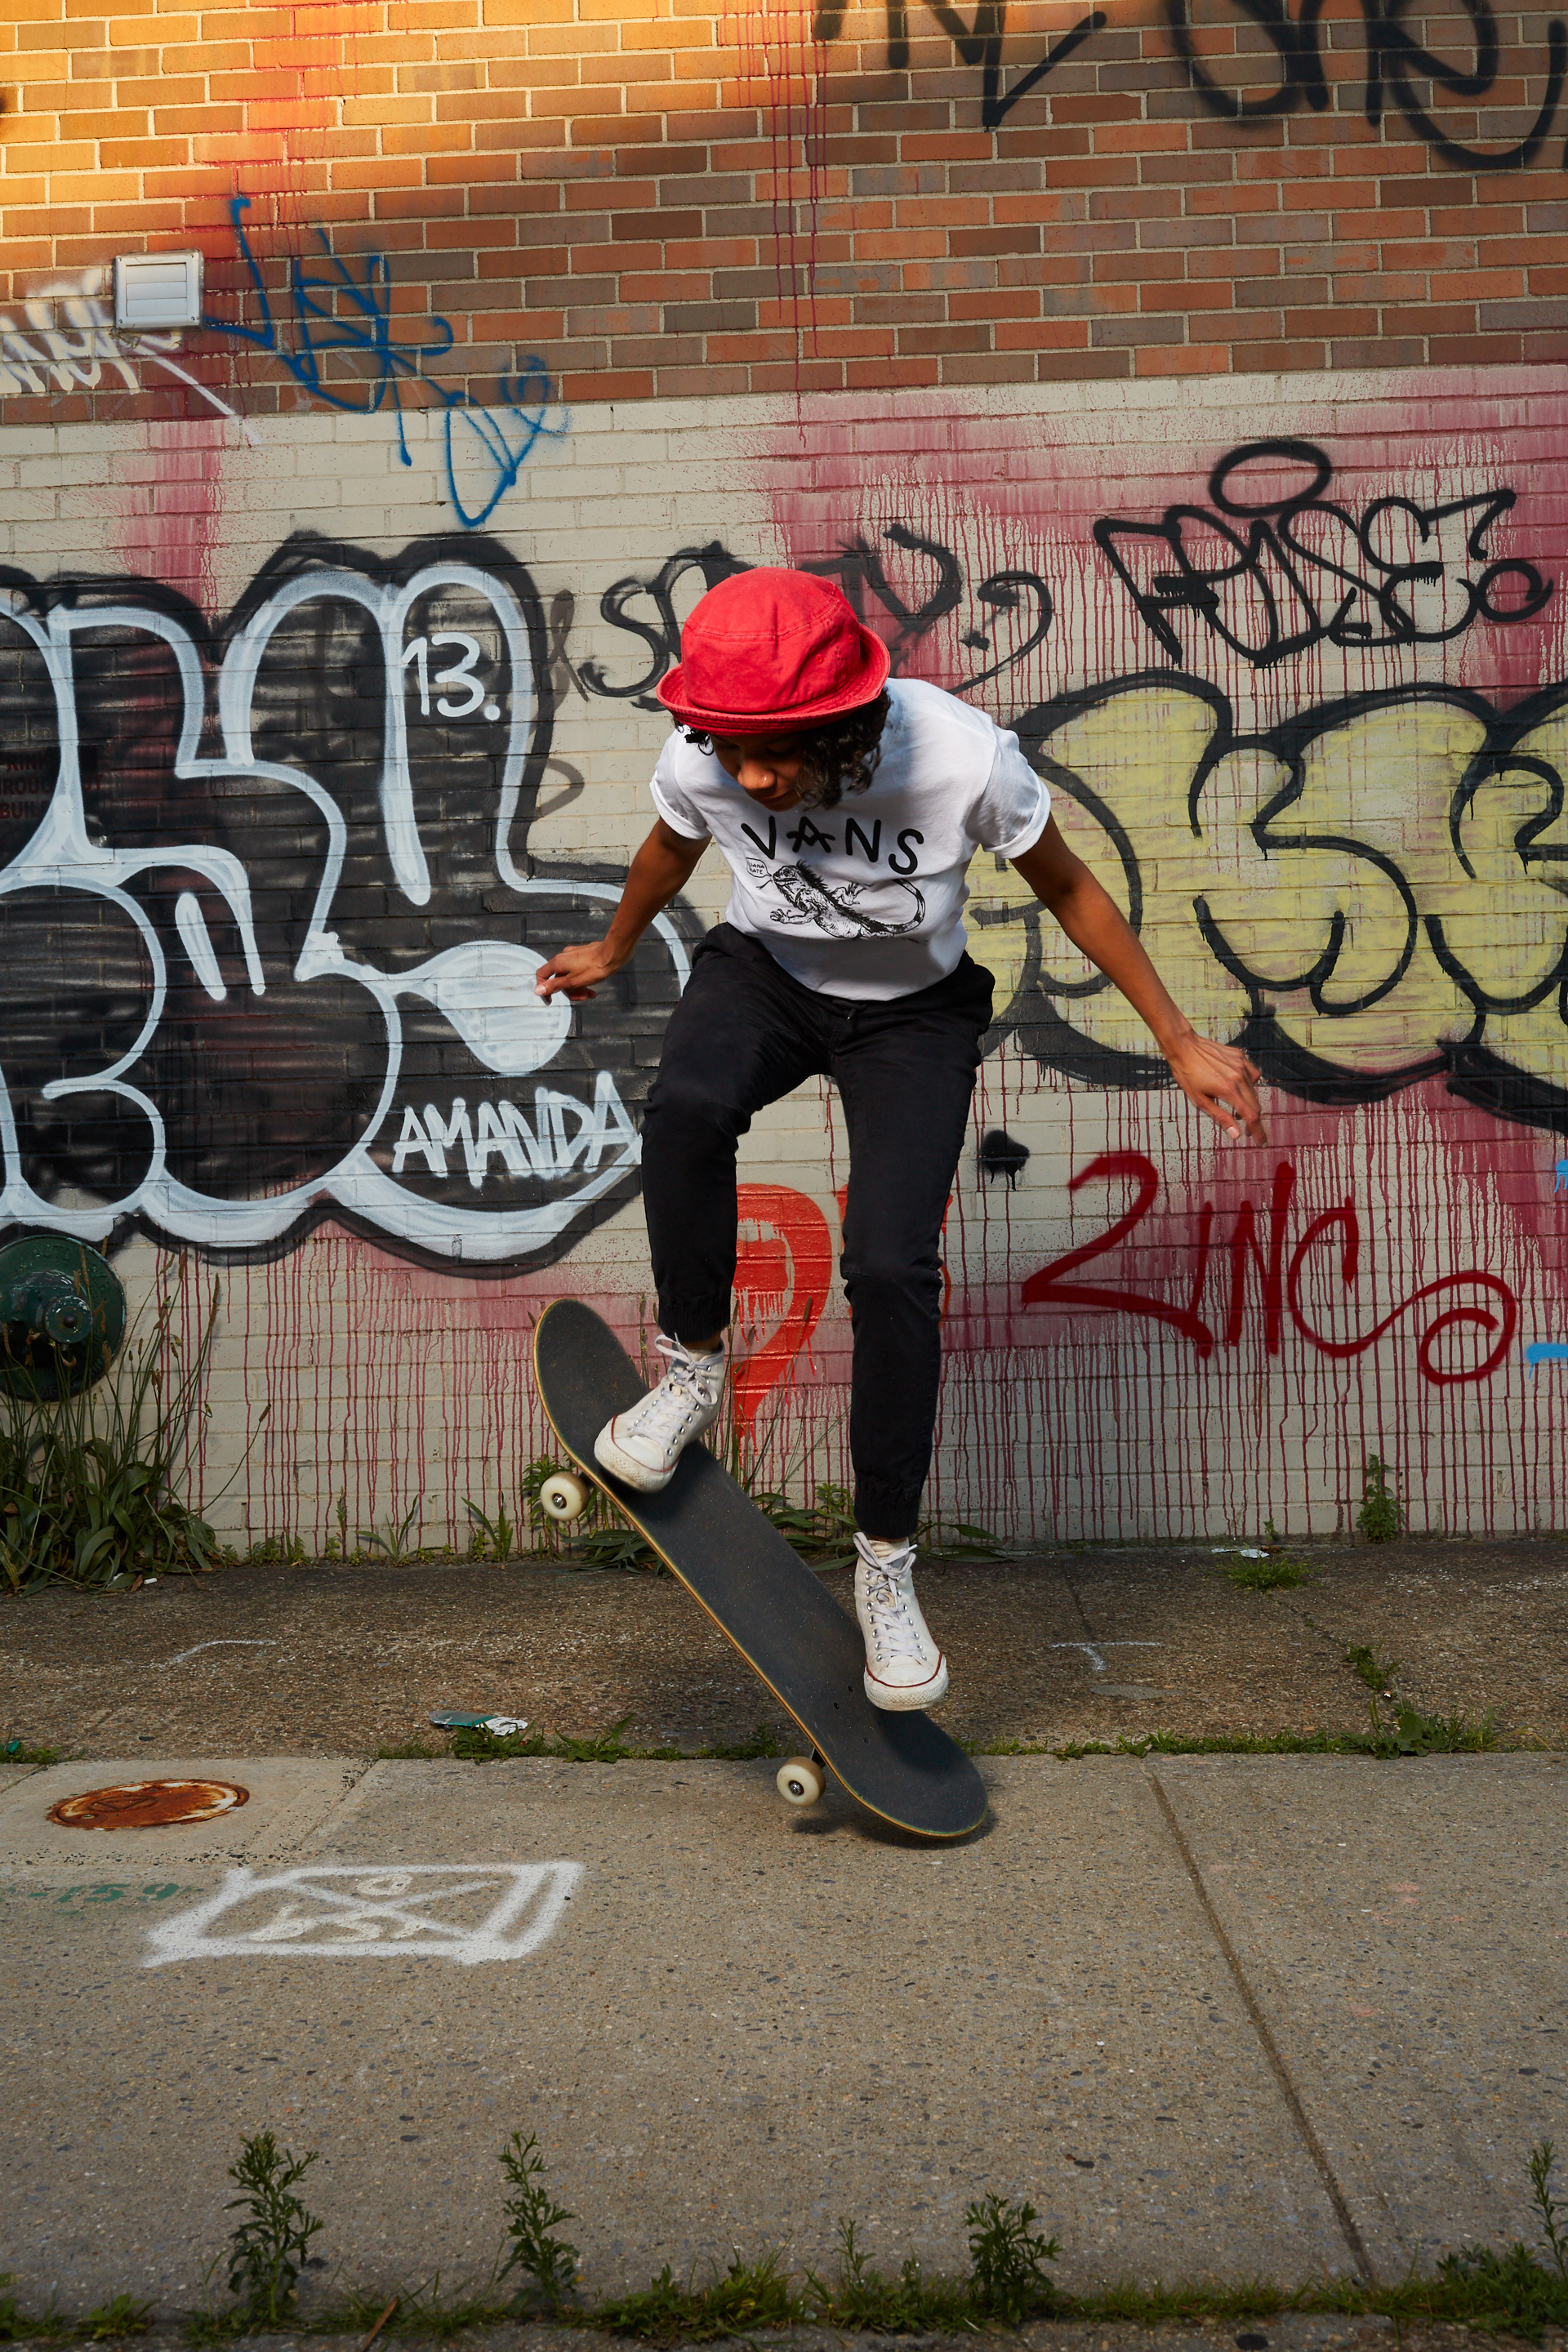 Skate Boarding</a><br> by <a href='/profile/Bling-King/'>Bling King</a>